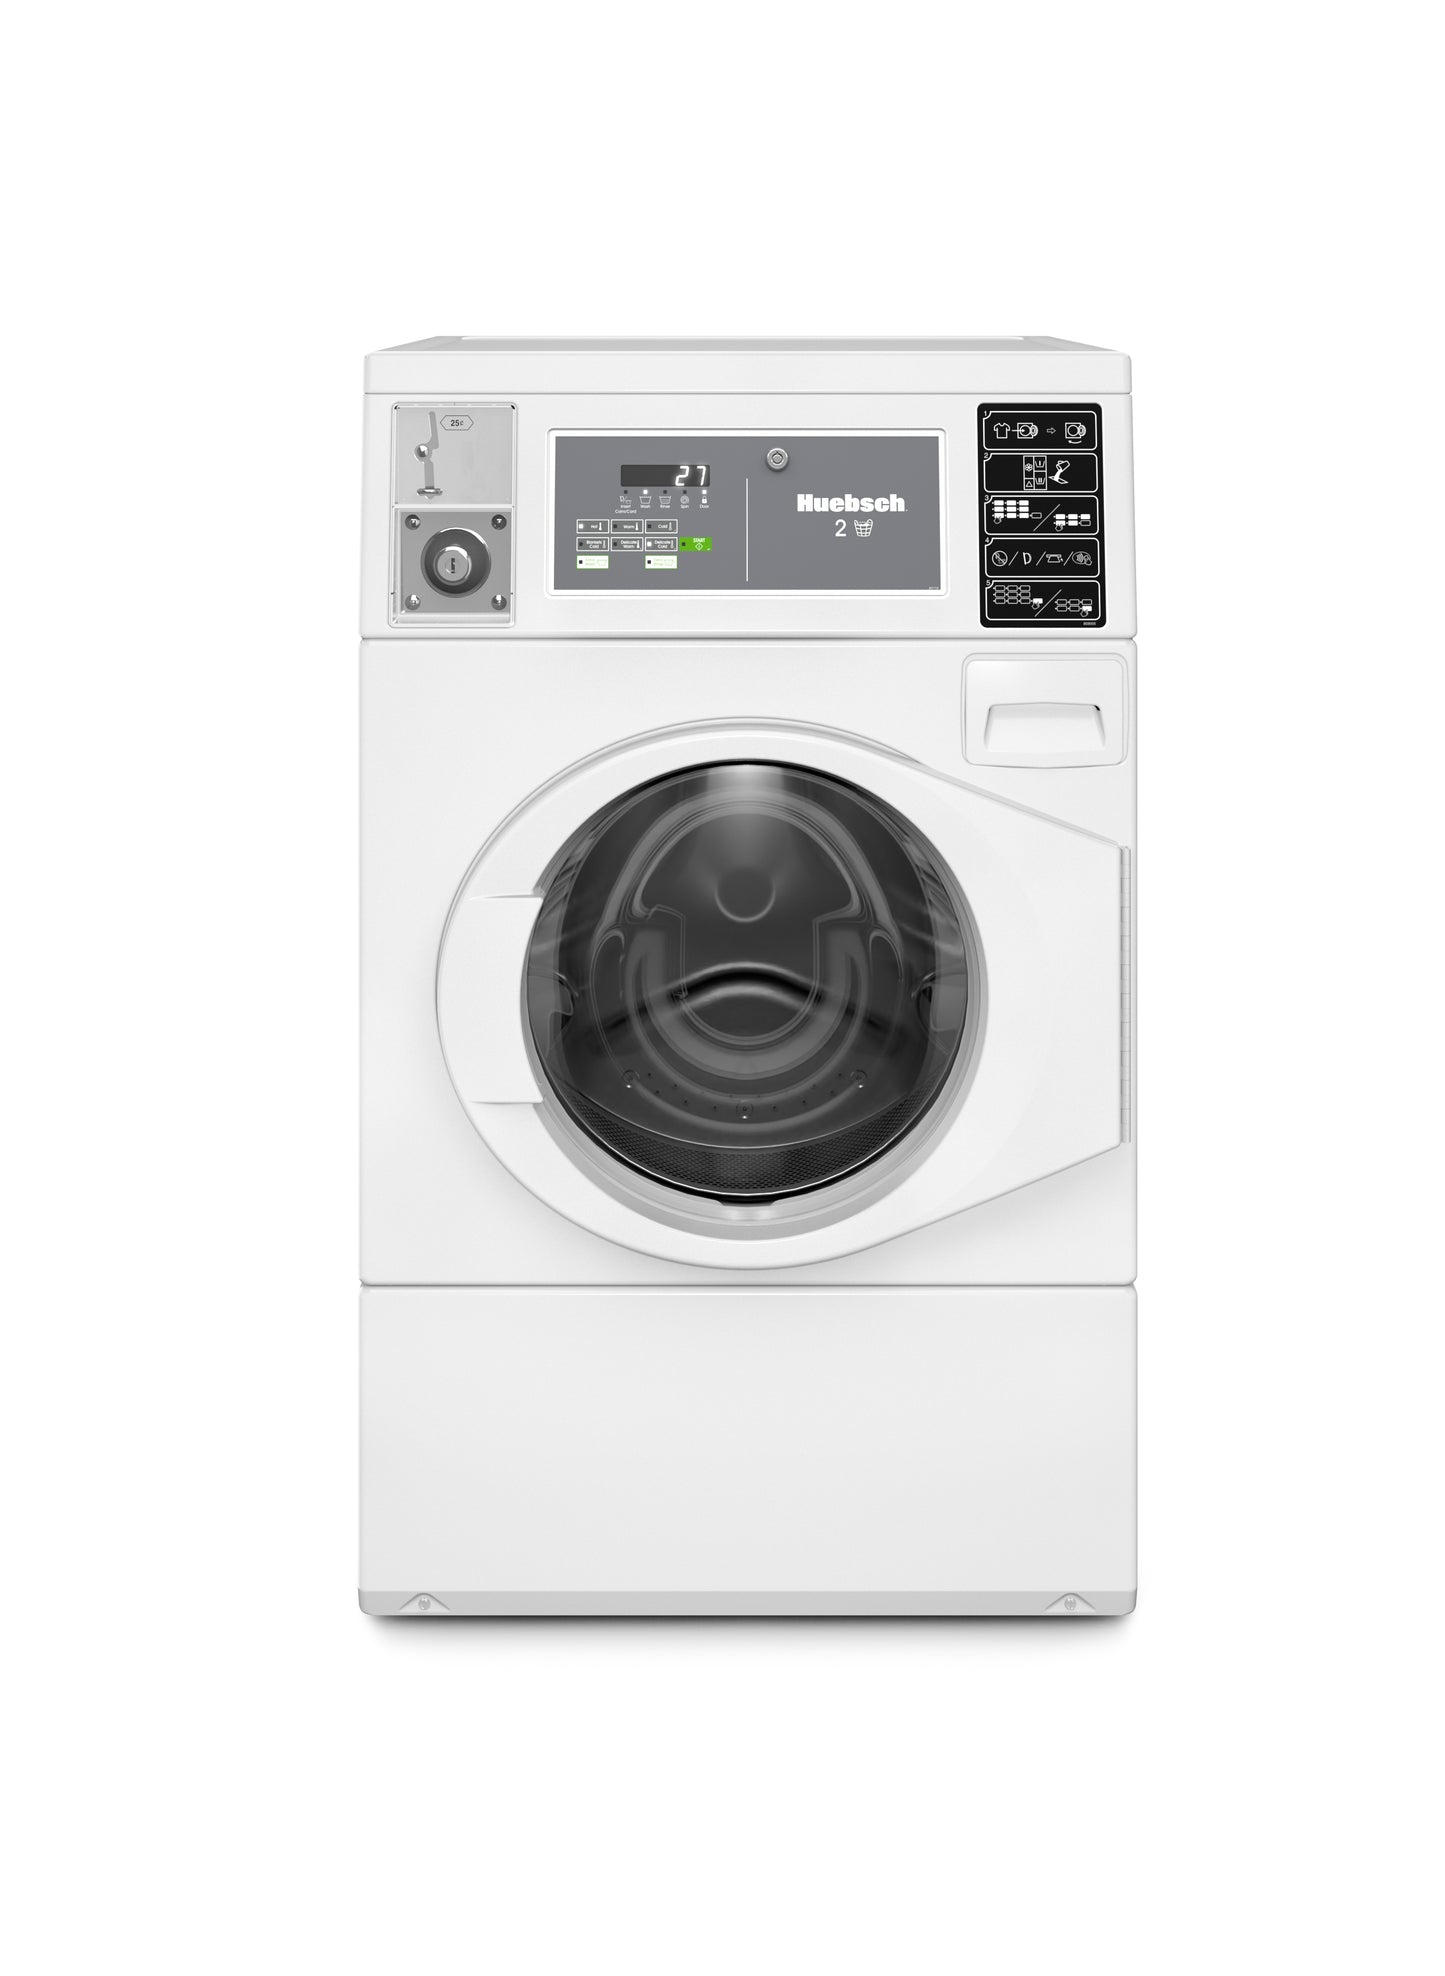 COMMERCIAL FRONT LOAD WASHER